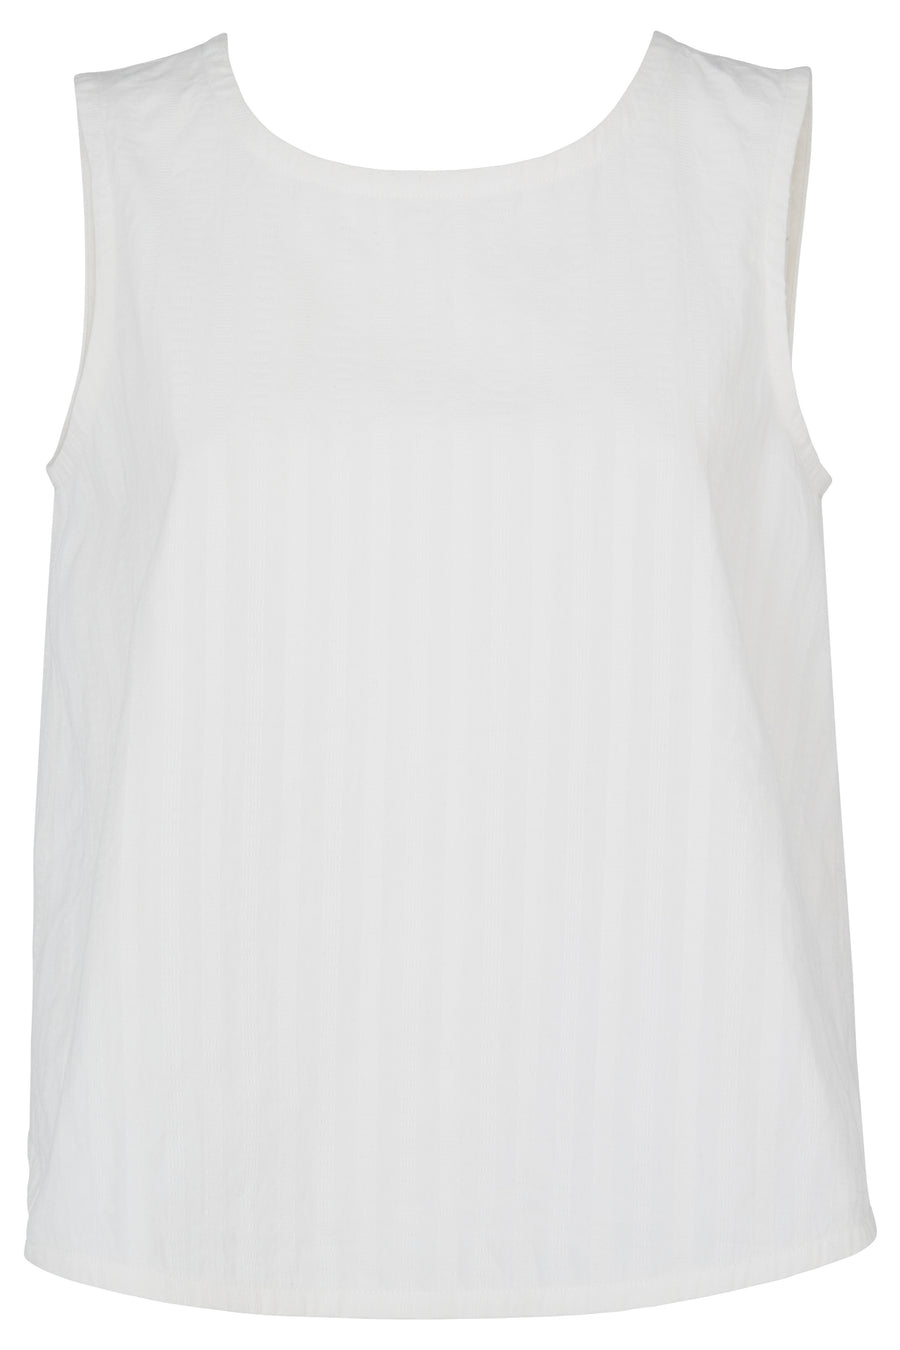 People Tree Fair Trade, Ethical & Sustainable Tavi Top in Eco white 100% Organic Cotton